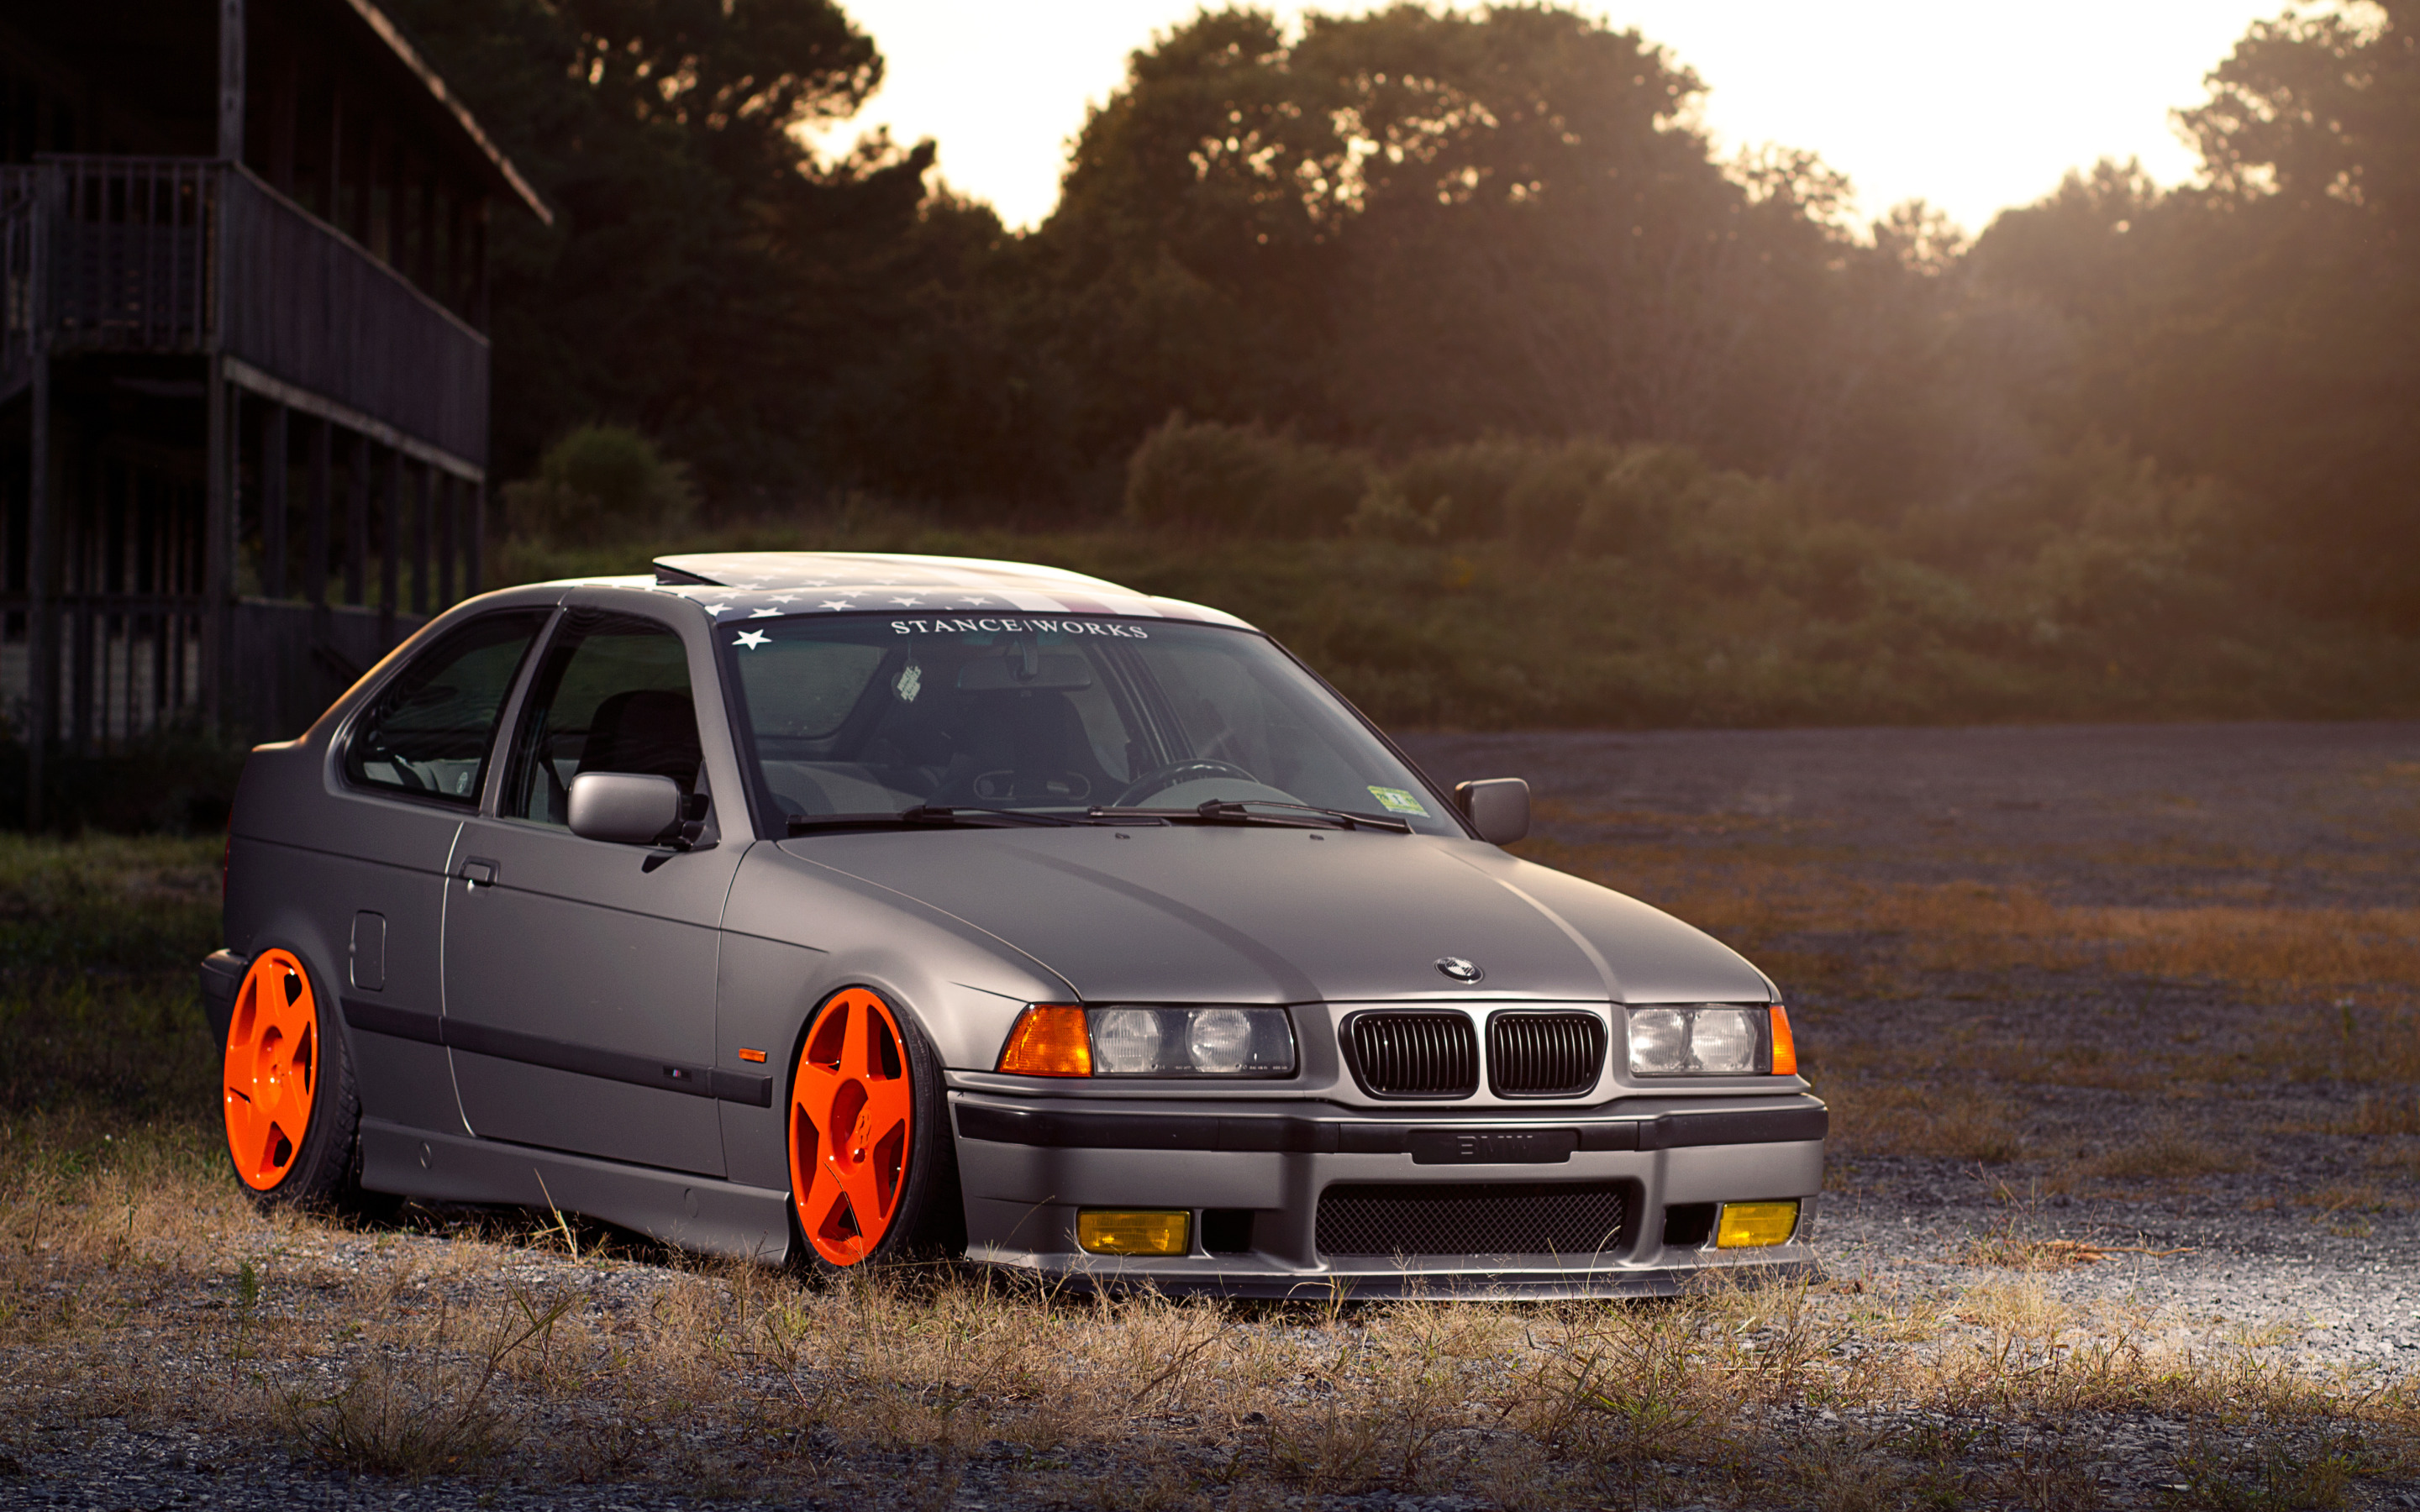 Download wallpaper auto, tuning, BMW, BMW, tuning, E36, section bmw in  resolution 2880x1800